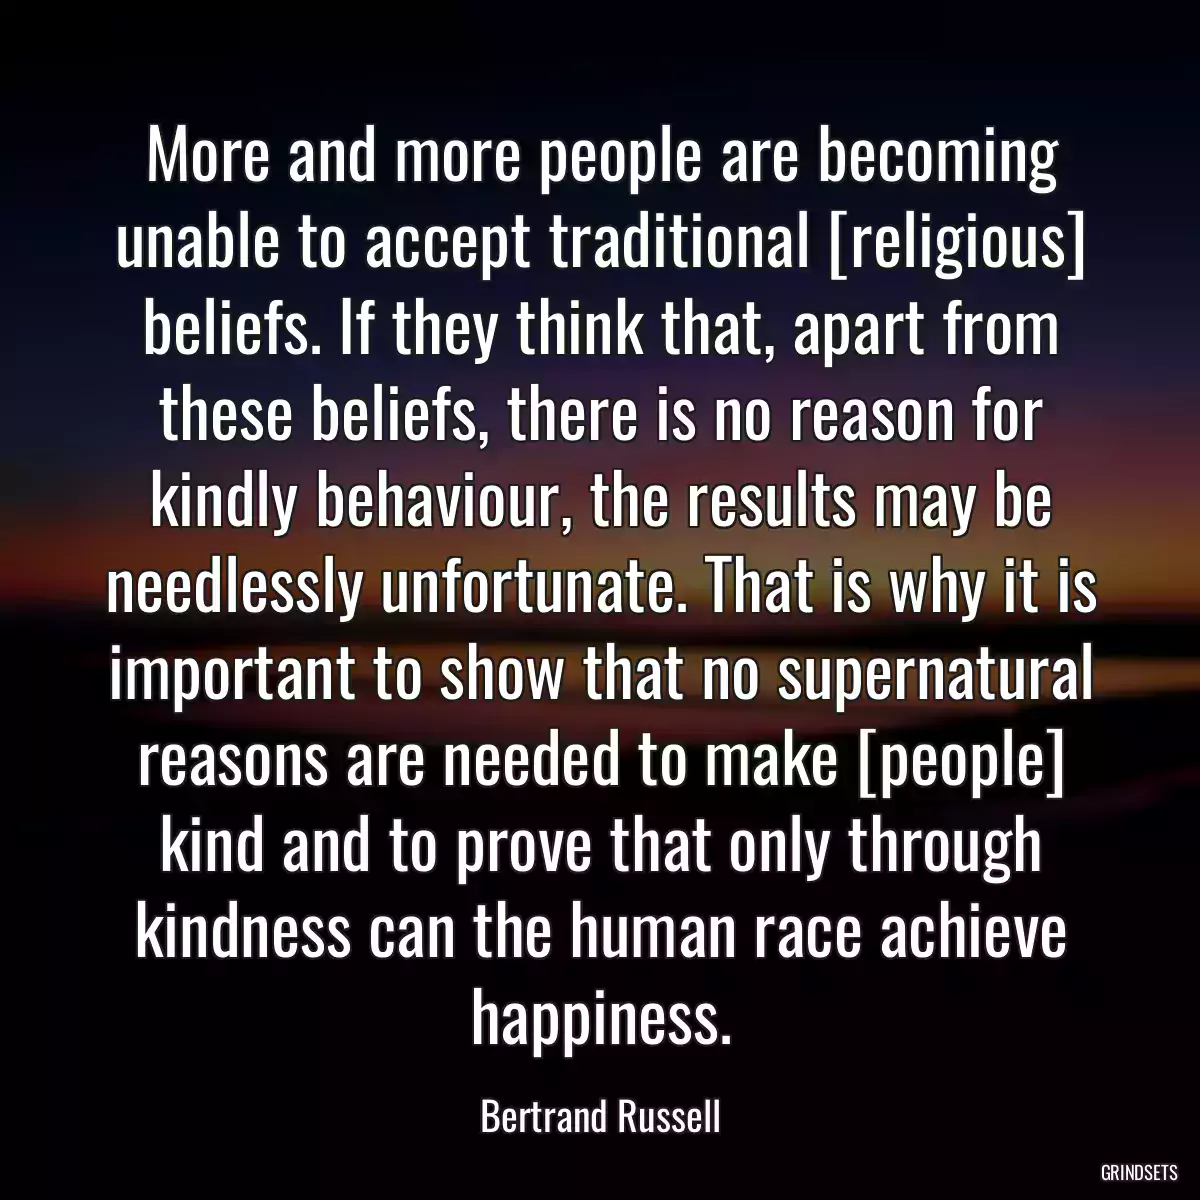 More and more people are becoming unable to accept traditional [religious] beliefs. If they think that, apart from these beliefs, there is no reason for kindly behaviour, the results may be needlessly unfortunate. That is why it is important to show that no supernatural reasons are needed to make [people] kind and to prove that only through kindness can the human race achieve happiness.